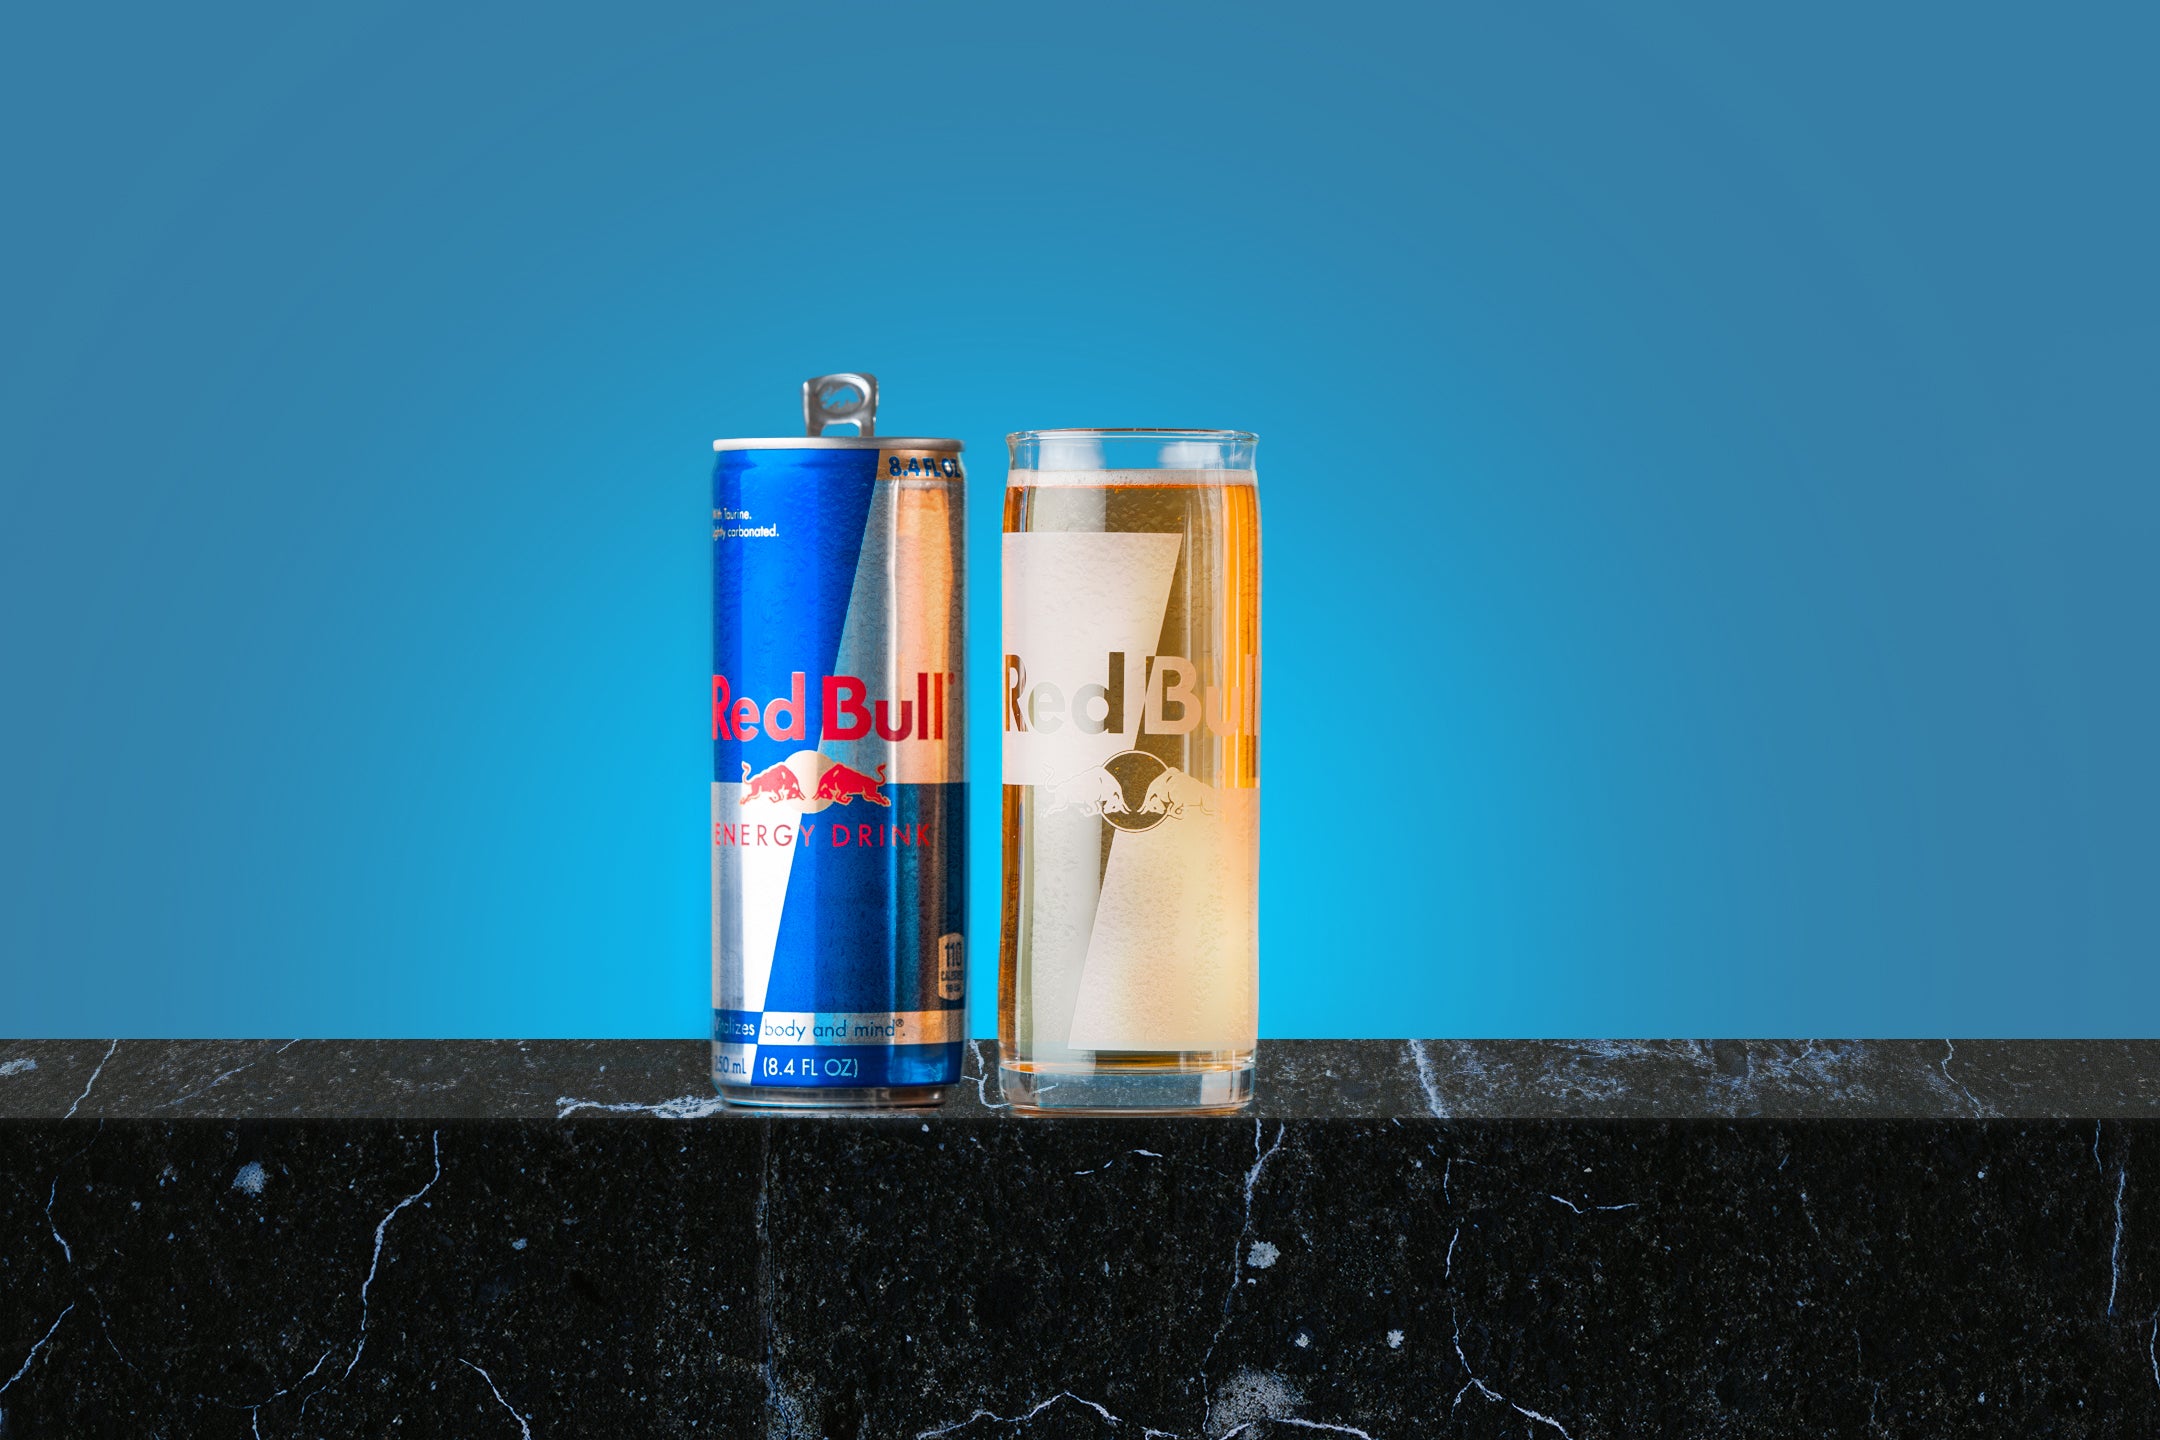  Red Bull Accessories